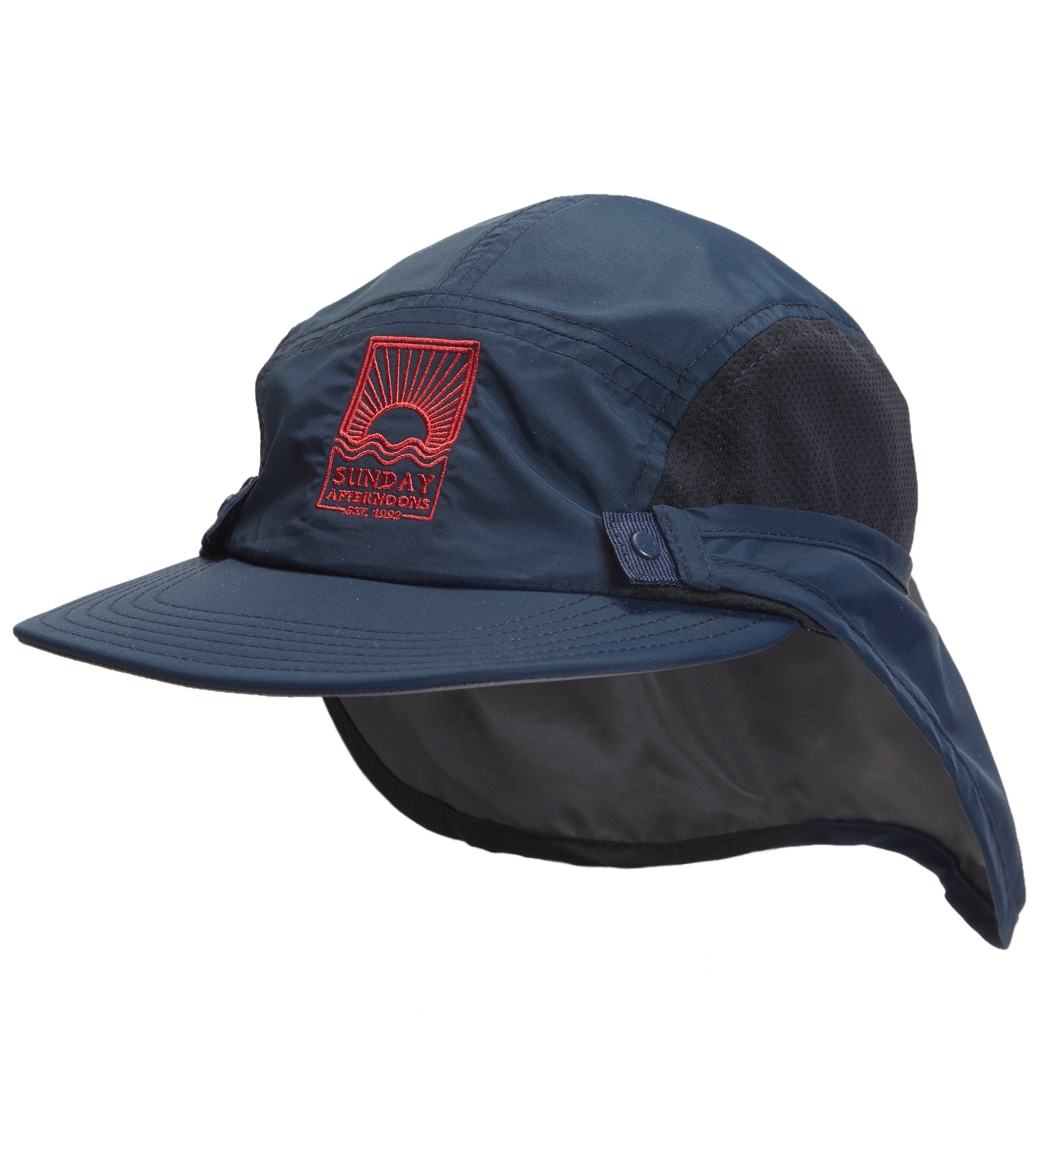 Sunday Afternoons Adventure Mesh Cap - Captain's Navy Polyester - Swimoutlet.com